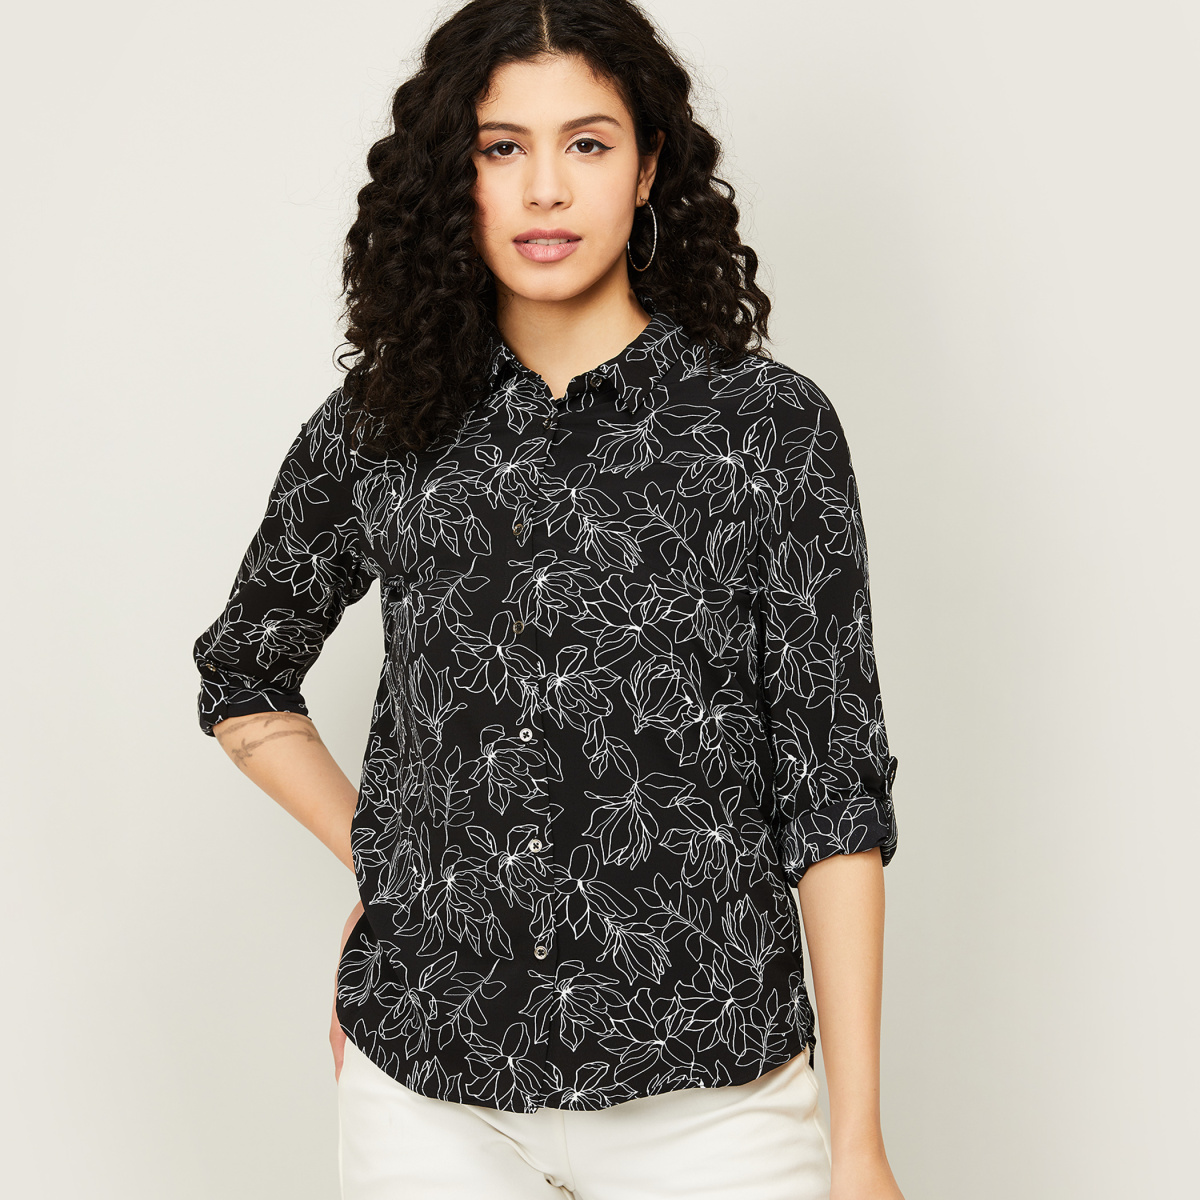 FAME FOREVER Women Printed Spread Collar Casual Shirt